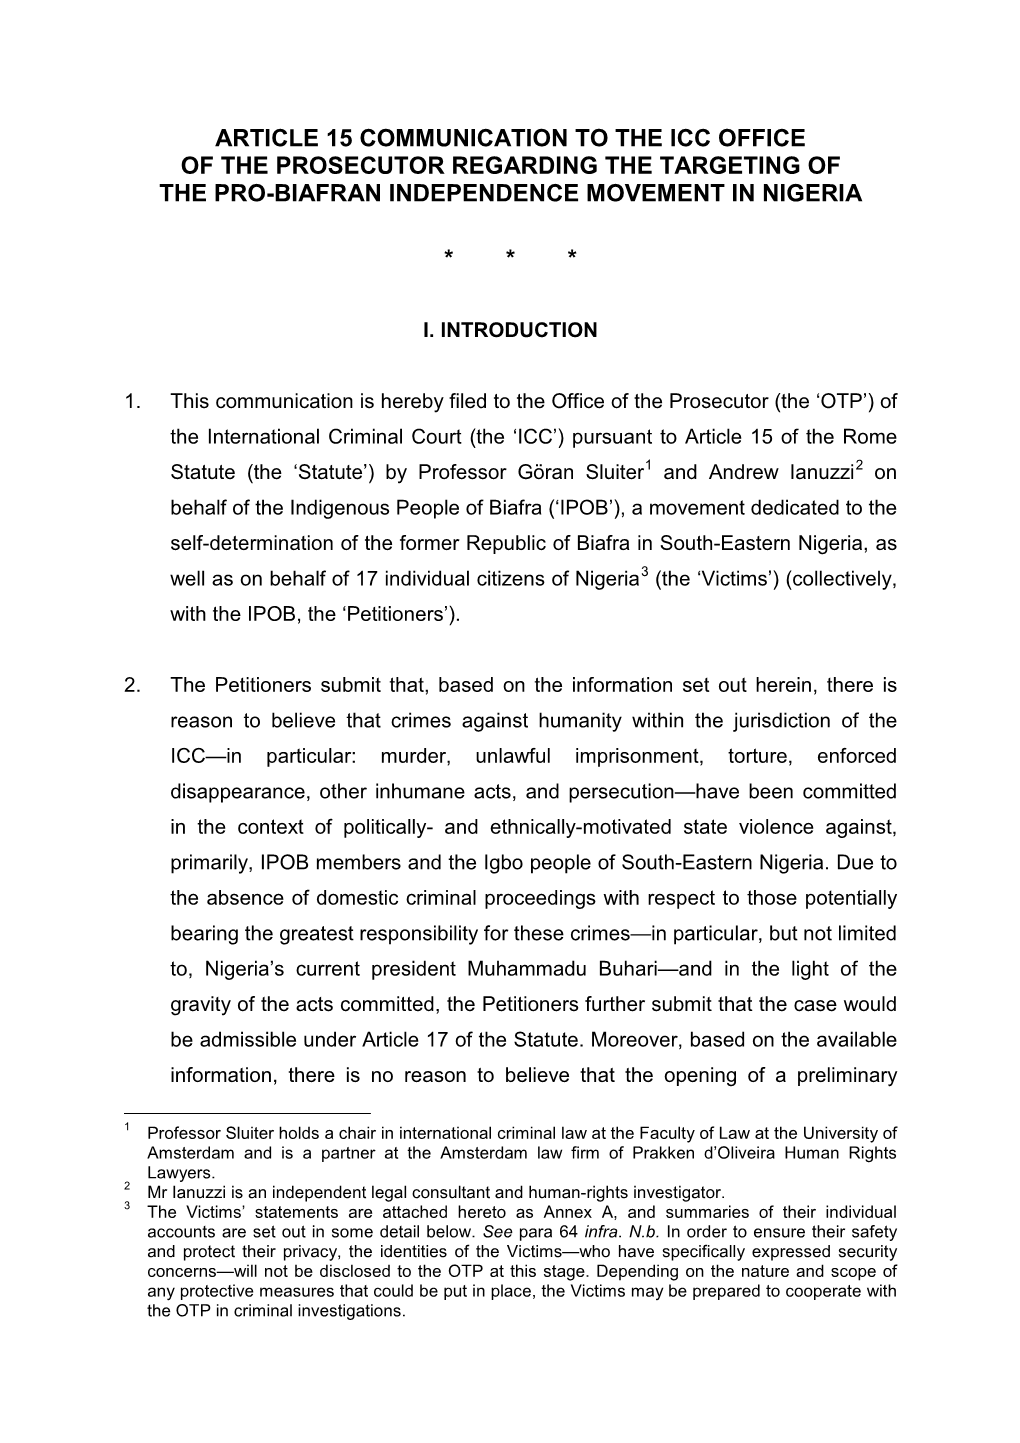 Article 15 Communication to the Icc Office of the Prosecutor Regarding the Targeting of the Pro-Biafran Independence Movement in Nigeria